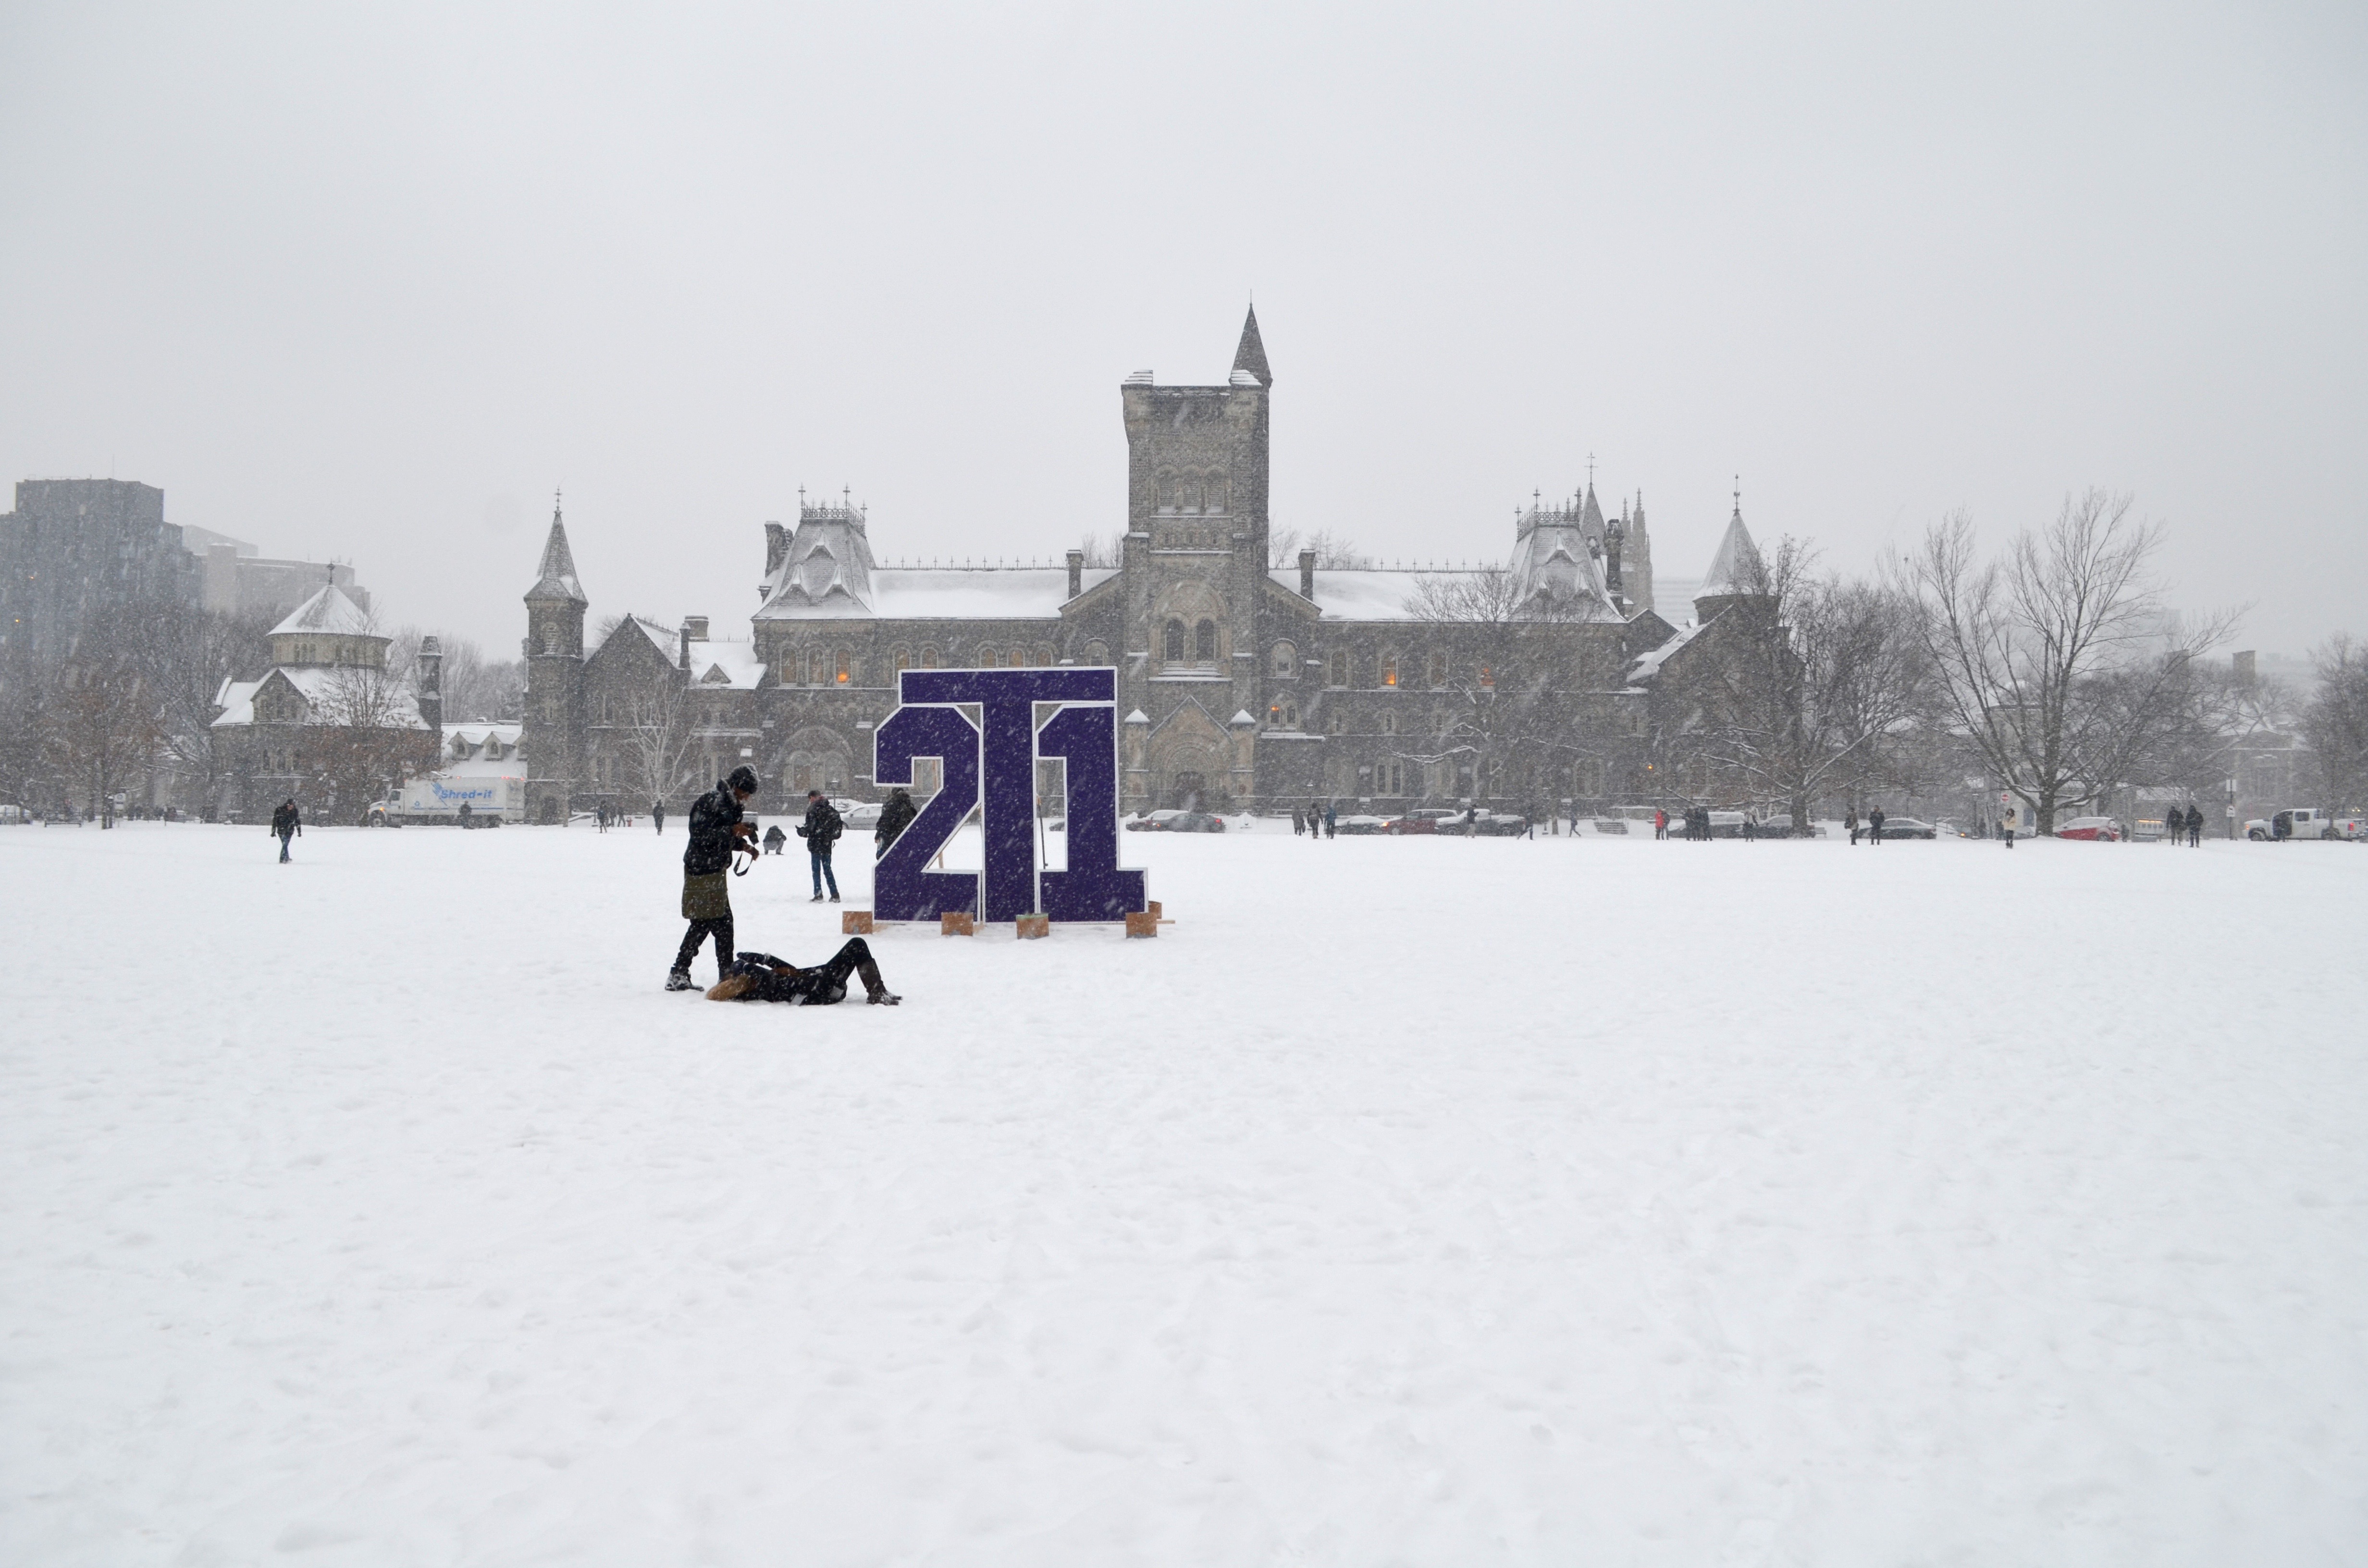 UC during snow time with a purple "2T1" sign on front campus field